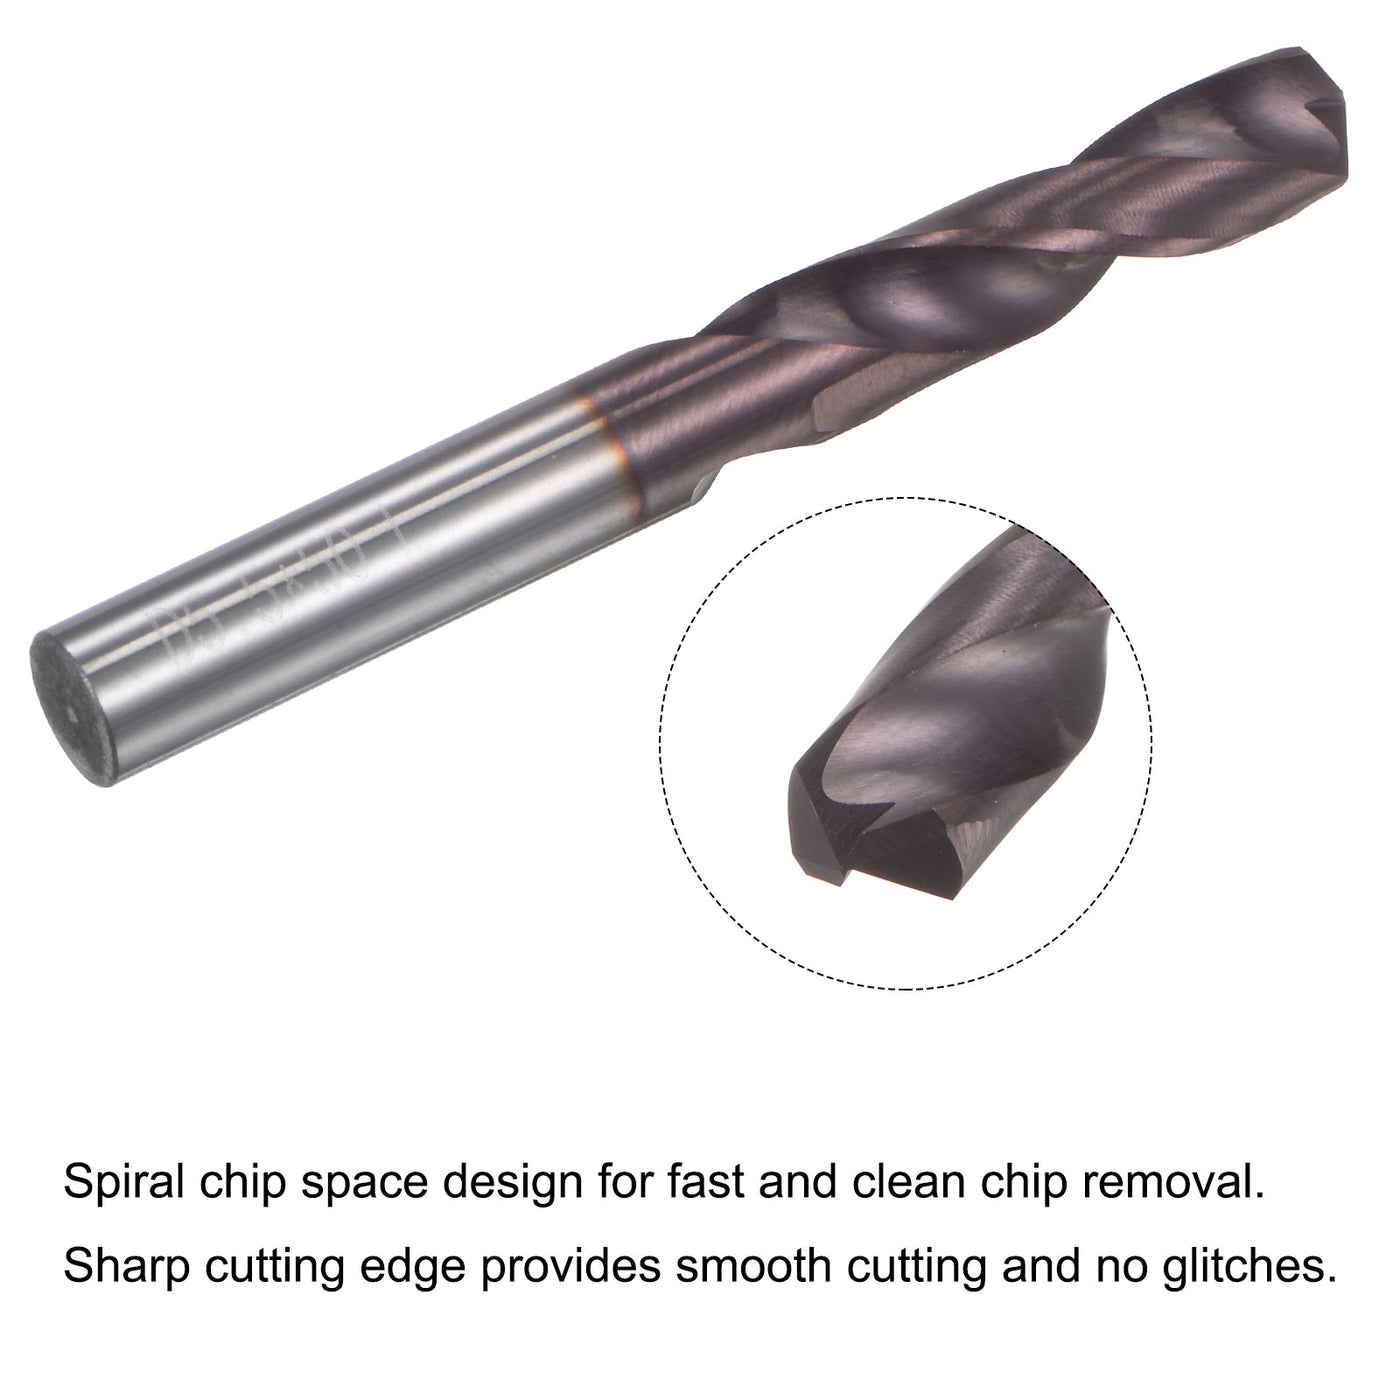 uxcell Uxcell 5.5mm DIN K45 Tungsten Carbide AlTiSin Coated Drill Bit for Stainless Steel